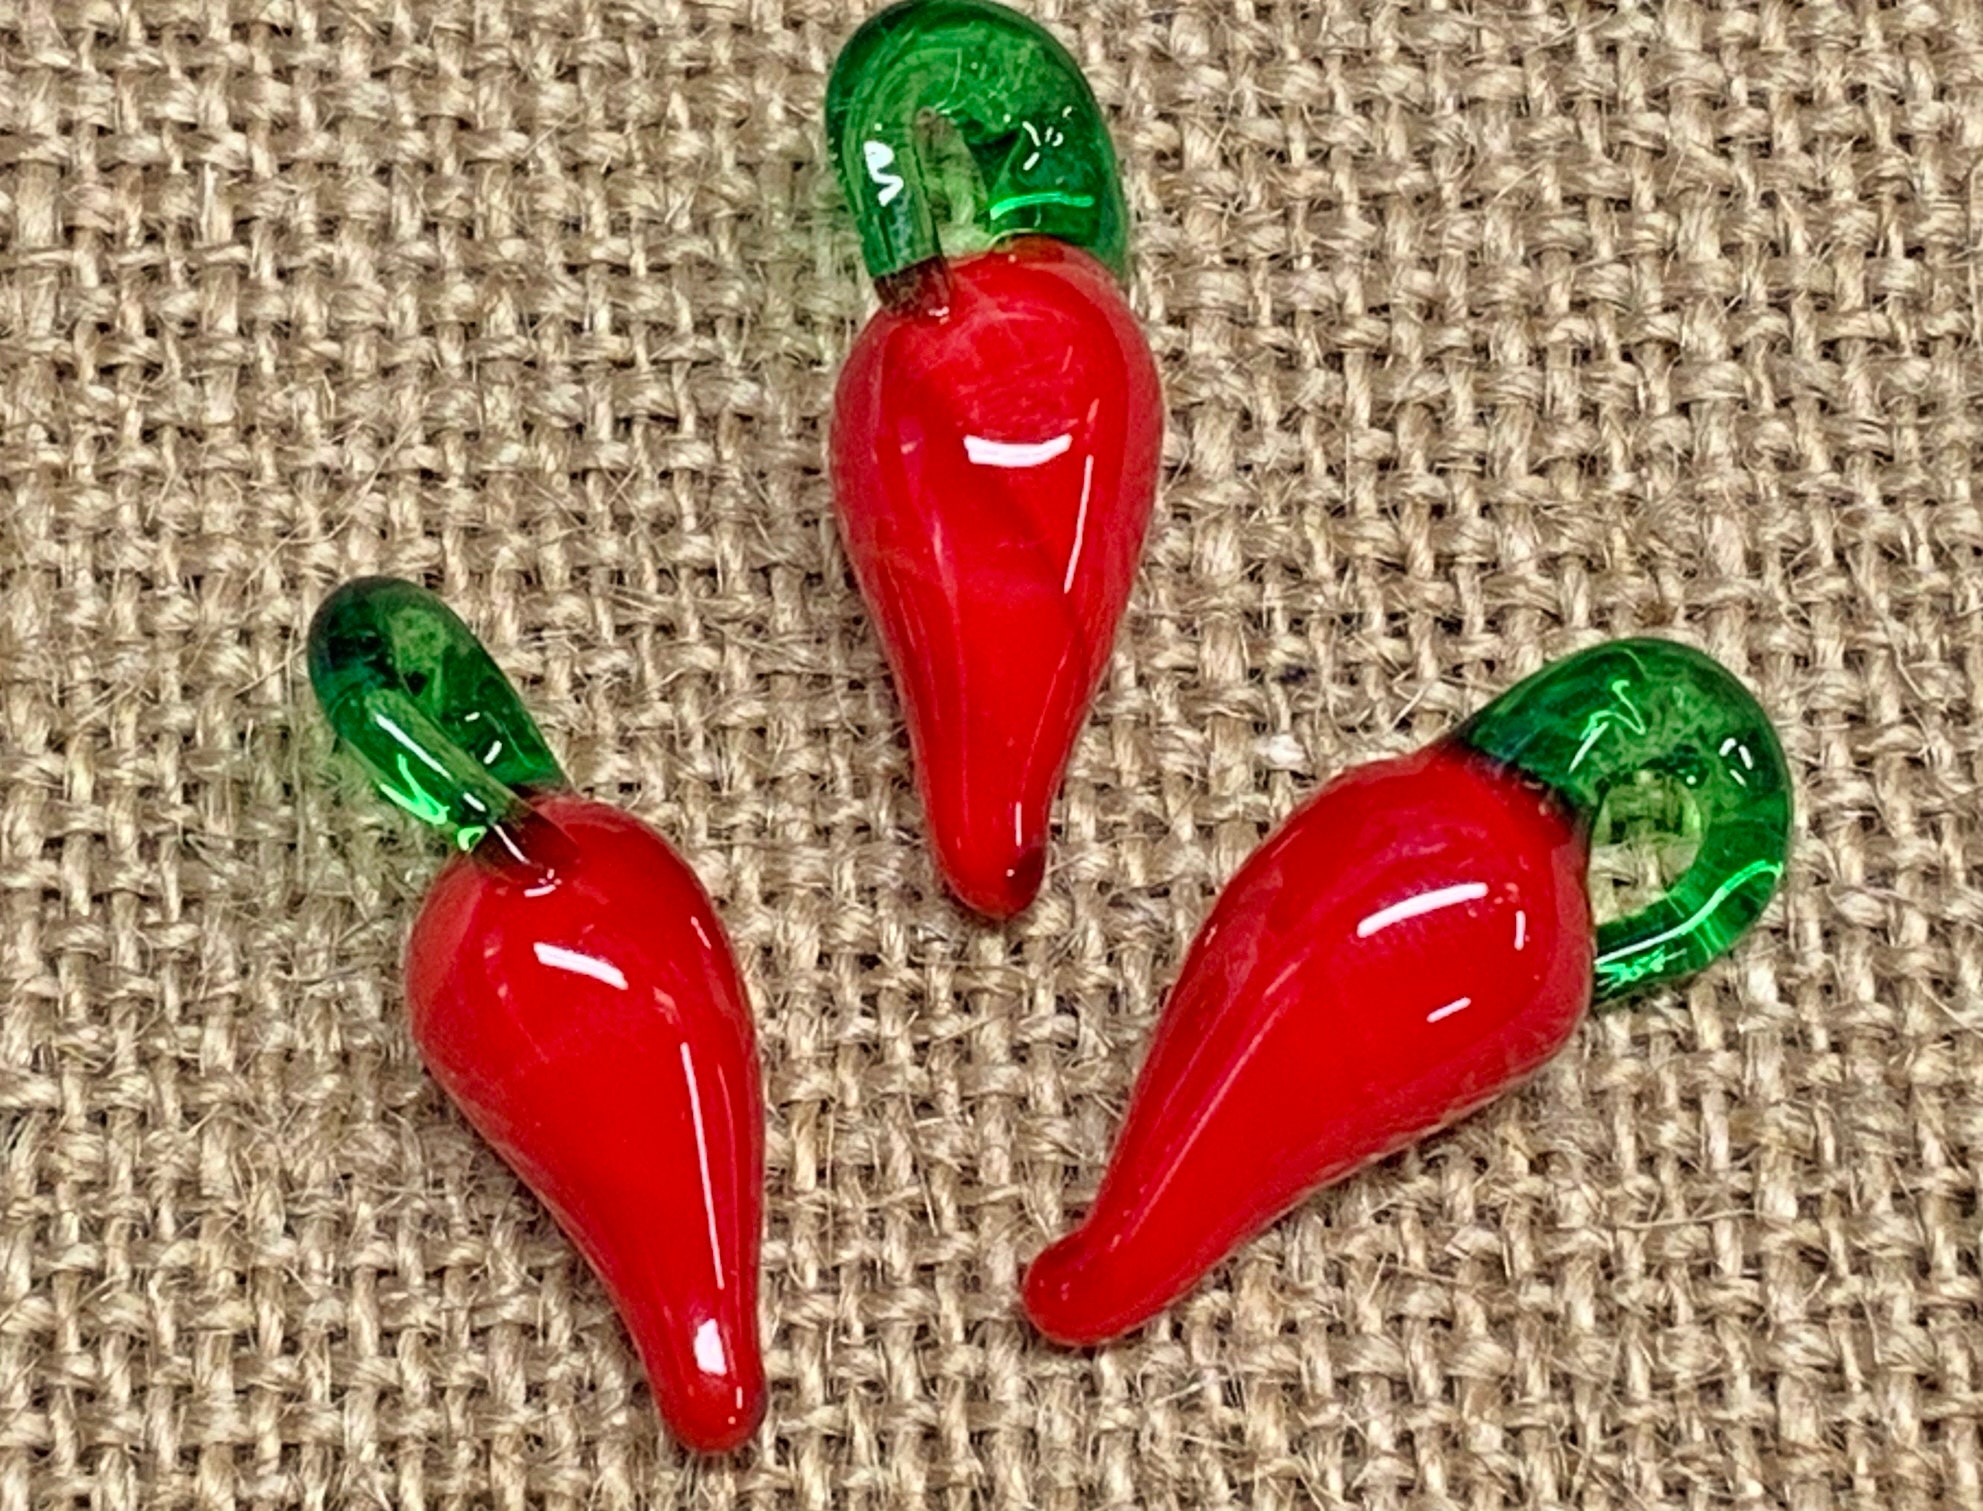 Non Light Up Five Jumbo Charm Chili Pepper Necklace for Cinco de Mayo 